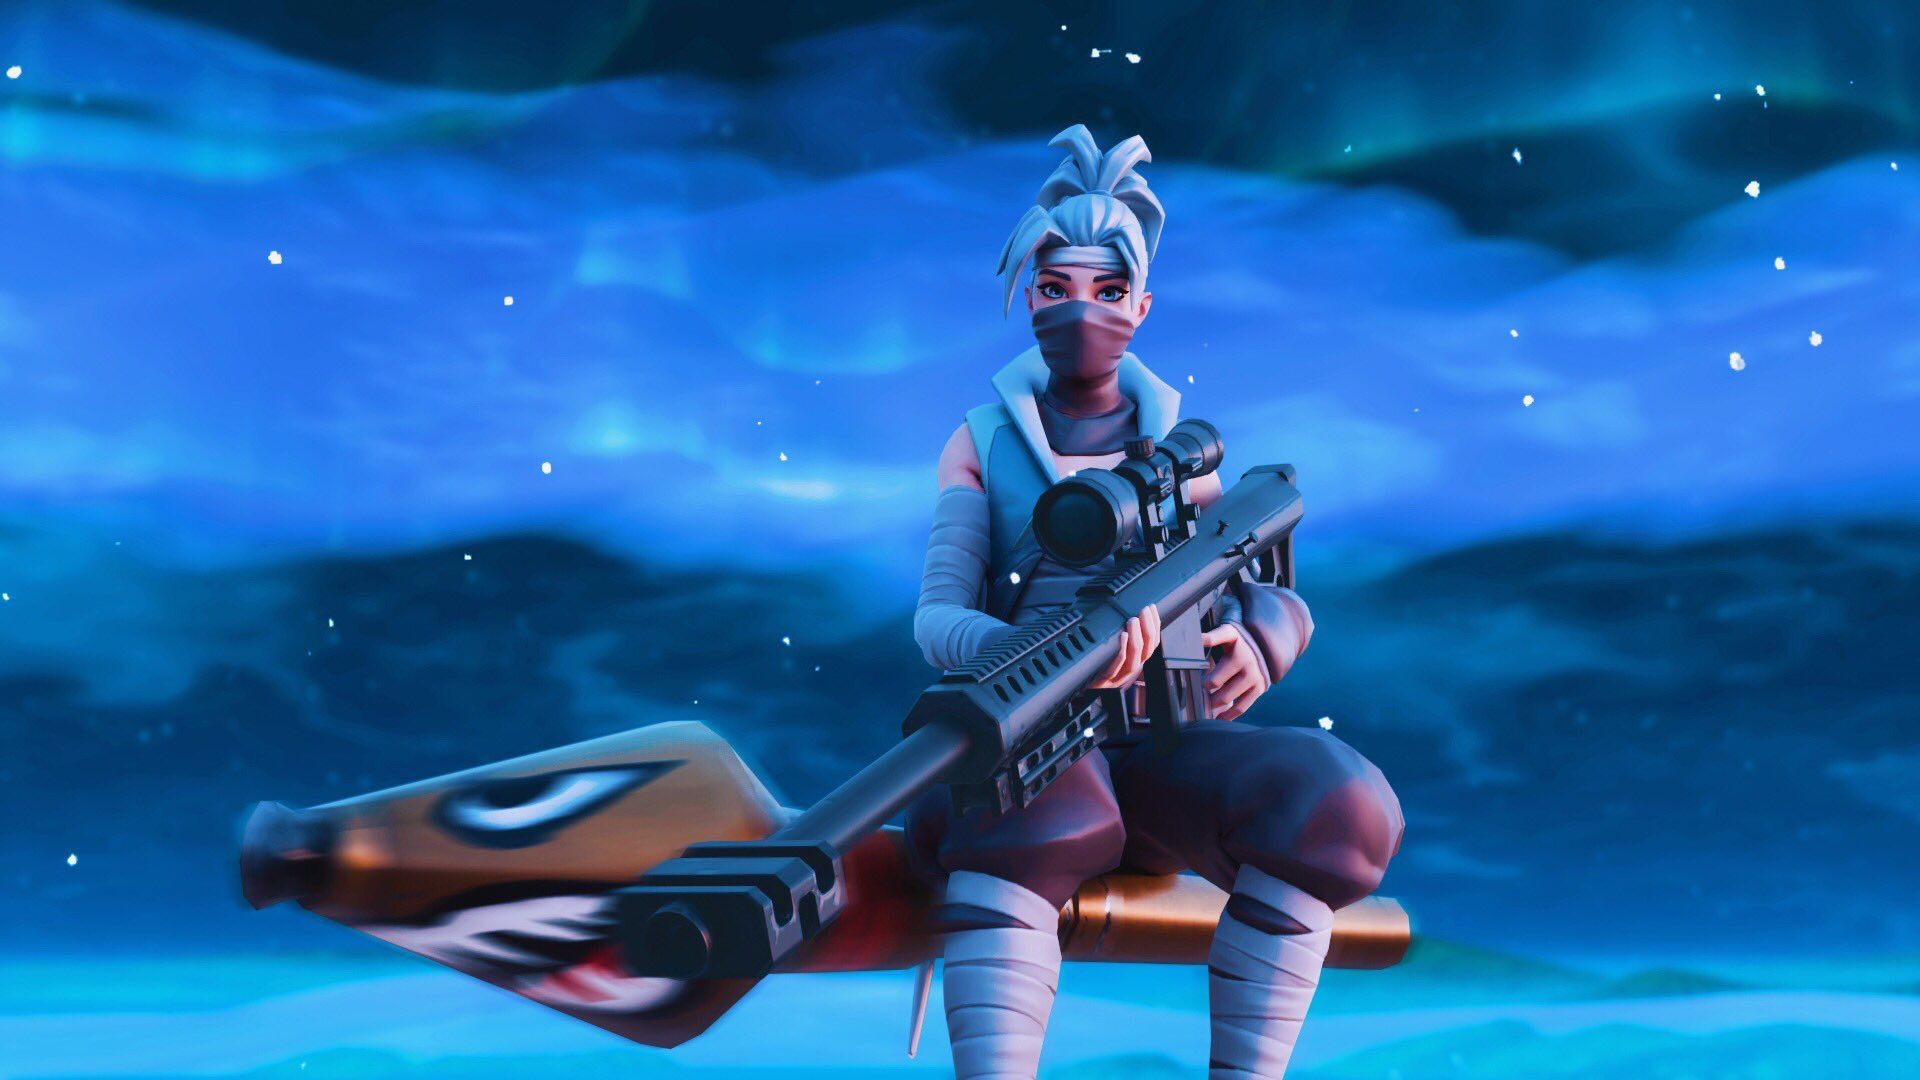 Fortnite Montage Wallpapers - Wallpaper Cave